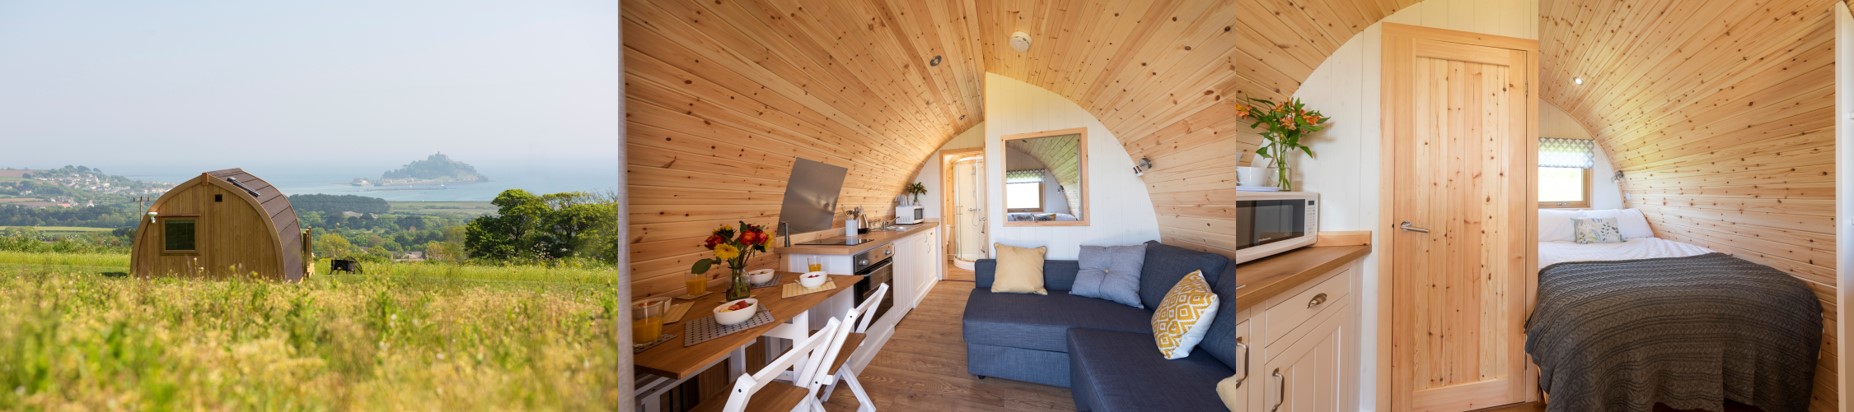 Mounts Bay Meadow Glamping